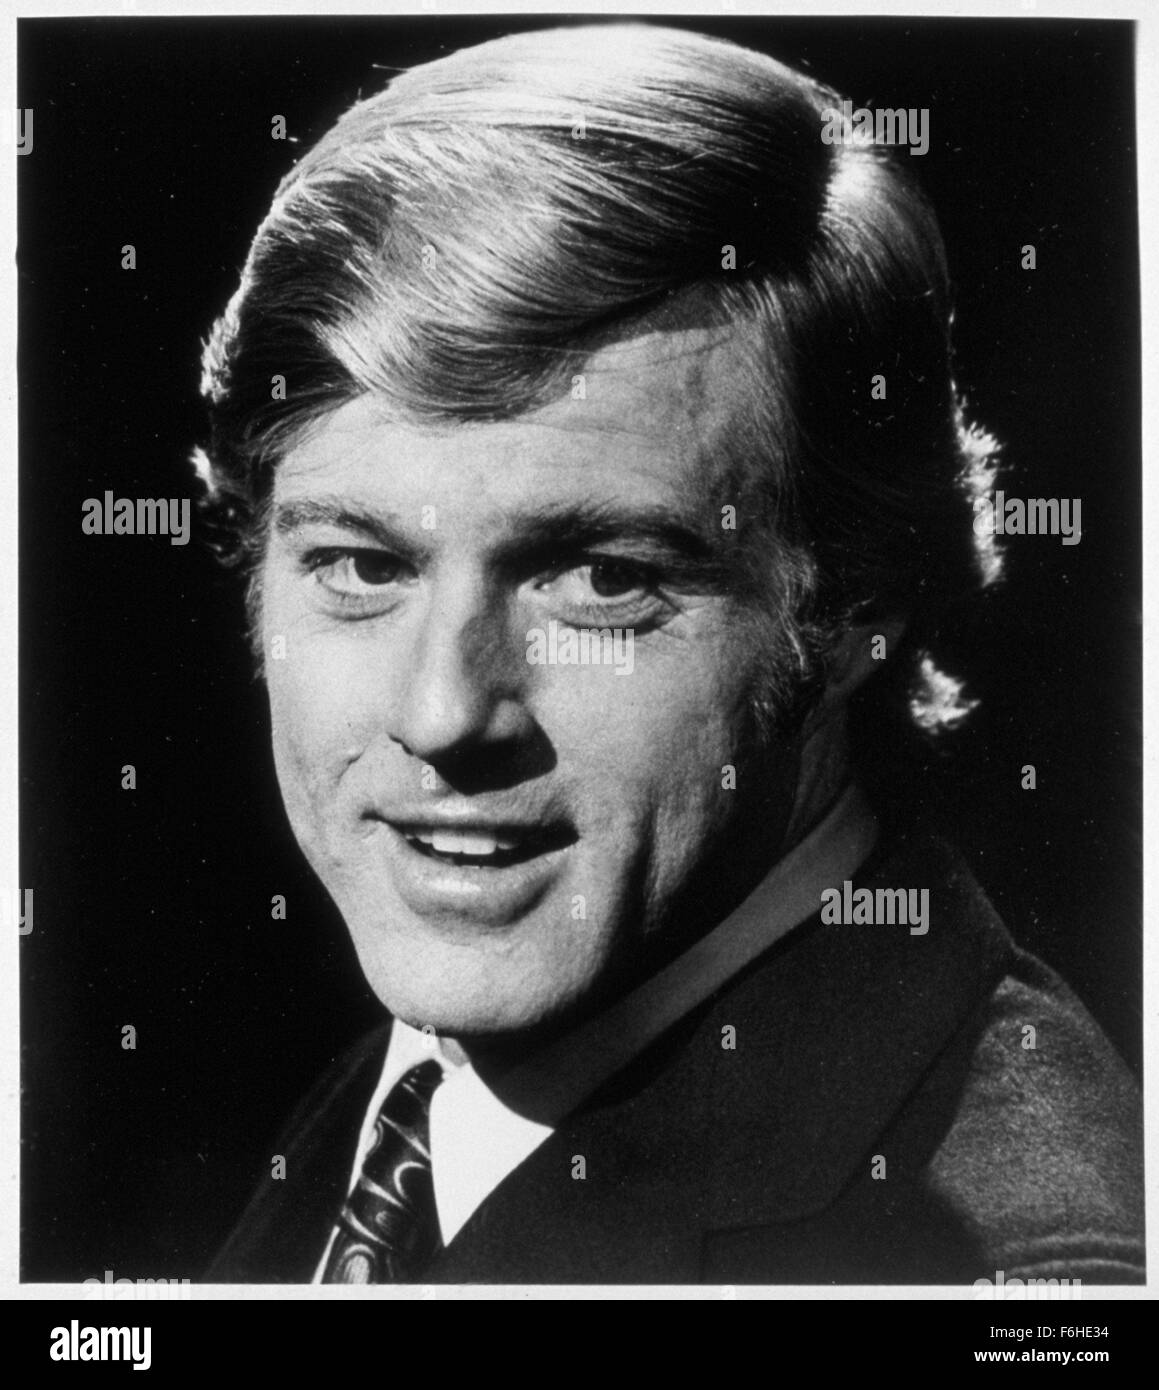 1972, Film Title: CANDIDATE, Director: MICHAEL RITCHIE, Studio: WB, Pictured: ROBERT REDFORD. (Credit Image: SNAP) Stock Photo